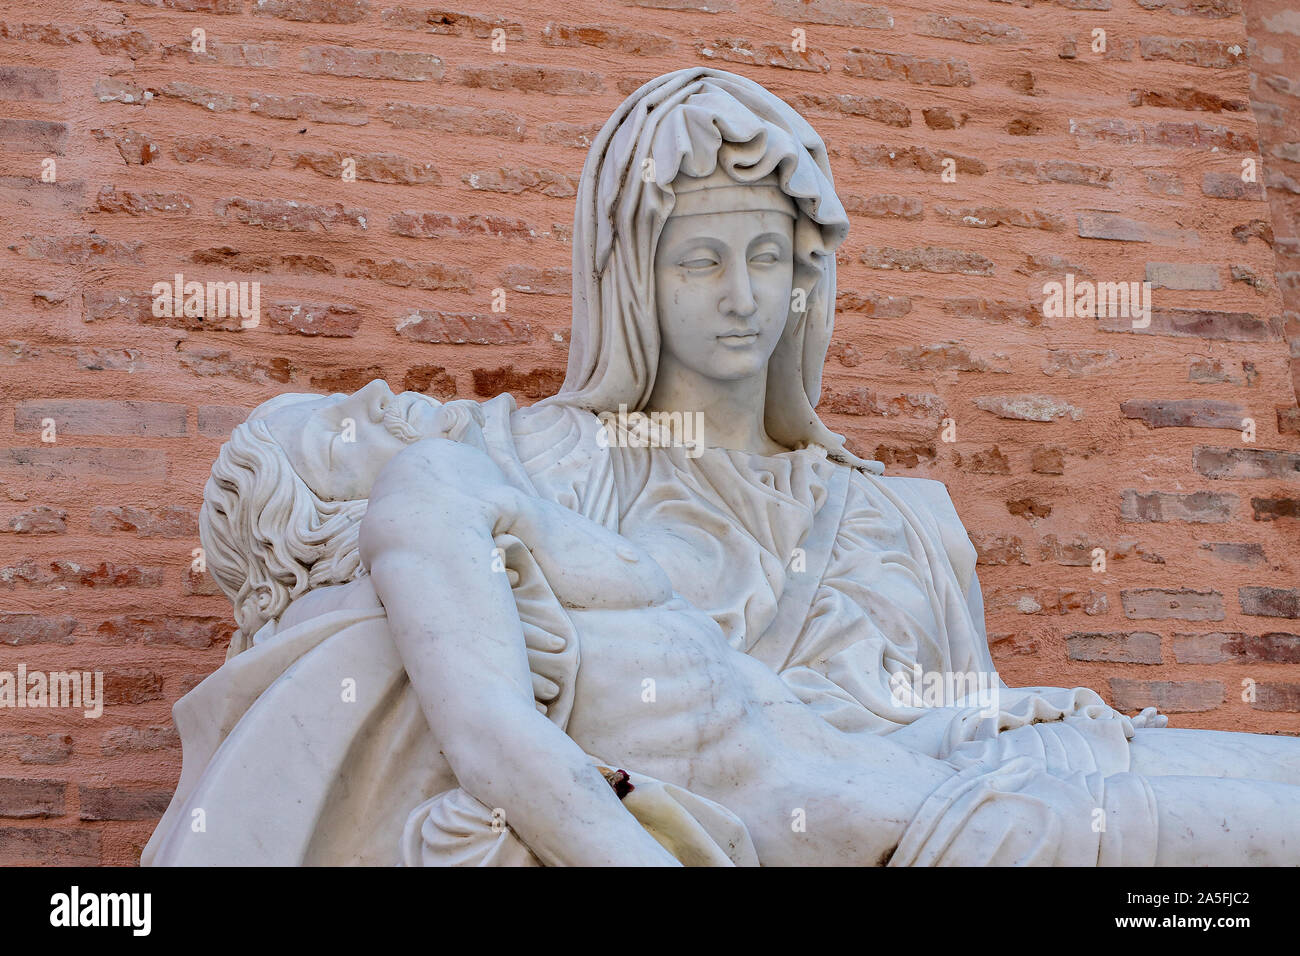 foreground detail of a replica of Miguel Angel´s famous sculpture the Pieta at Adolfo Suarez park of Torrejon de Ardoz, madrid, spain with  wall of br Stock Photo